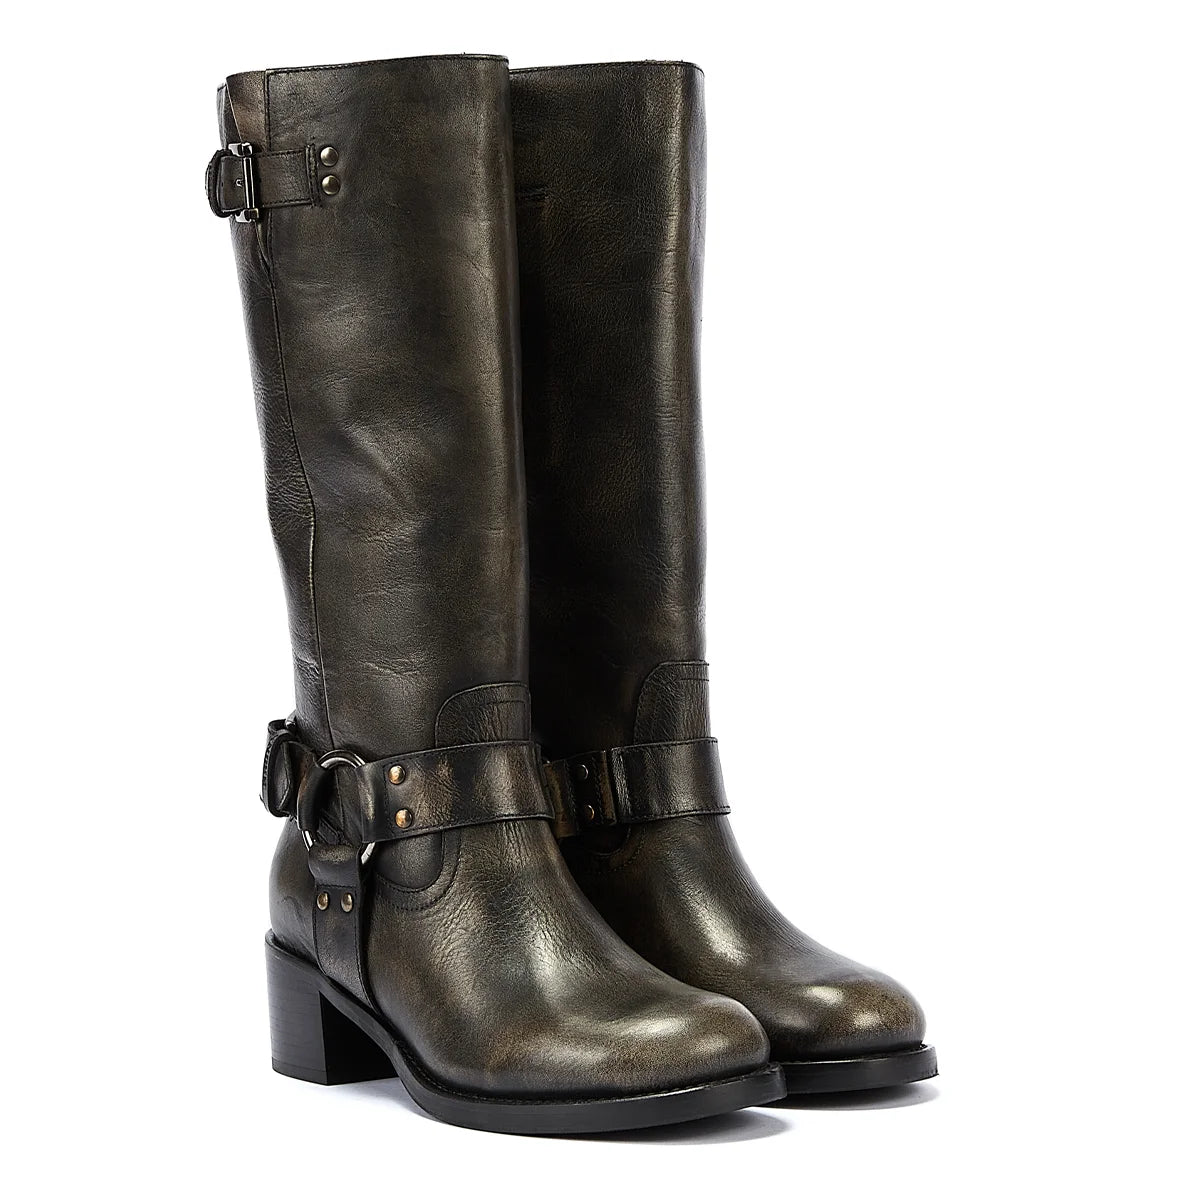 Bronx New-Camperos Women’s Black Boots